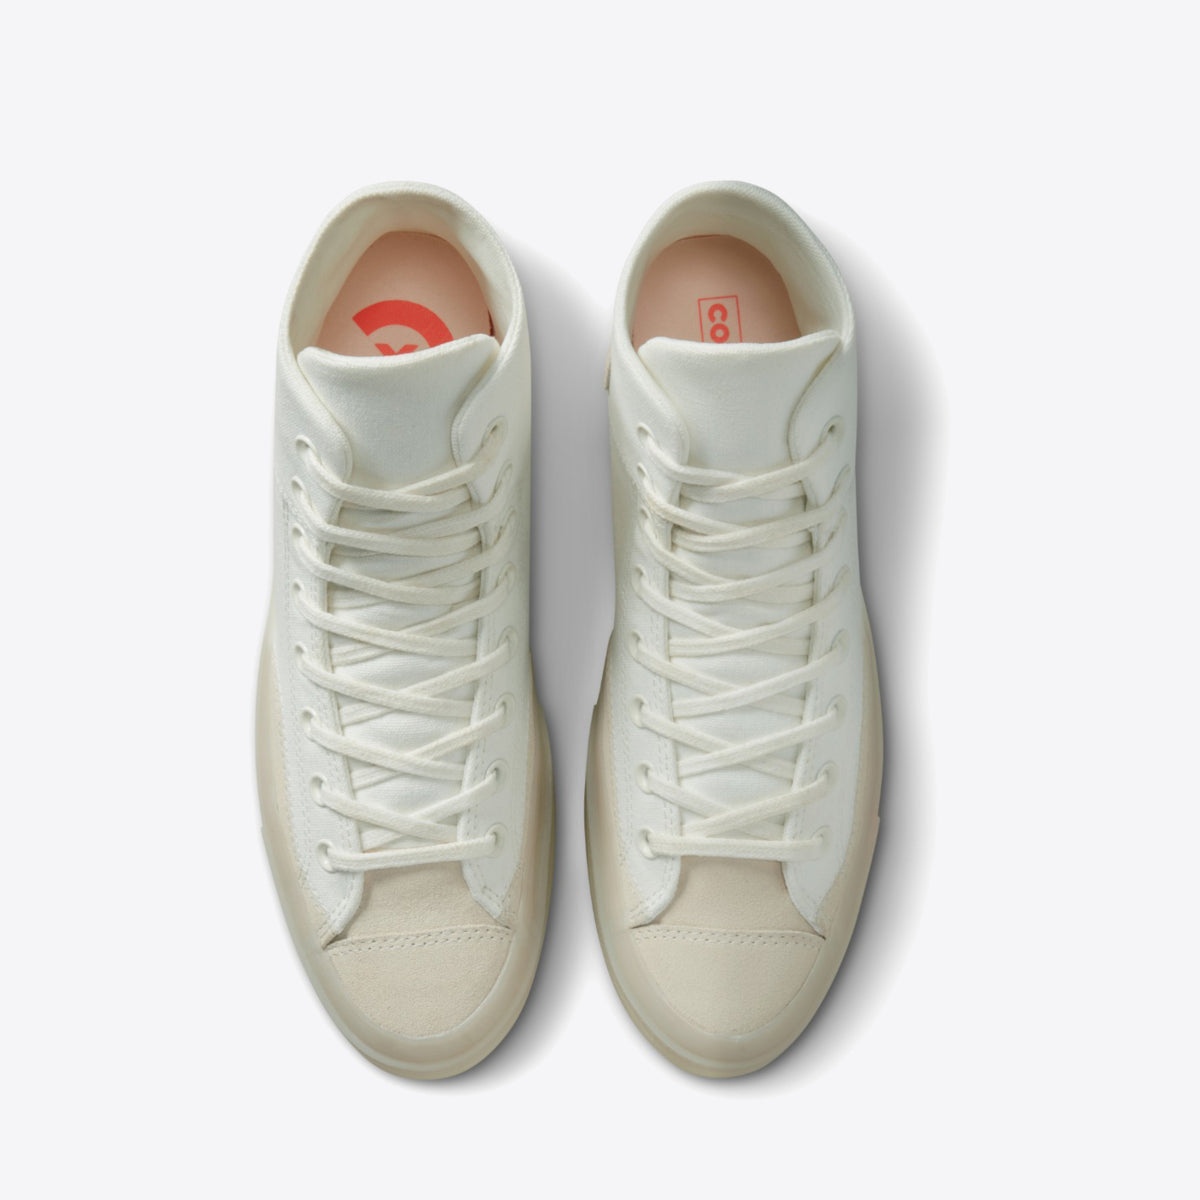 CONVERSE Chuck Taylor 70 Marquis High Vintage White - Image 6